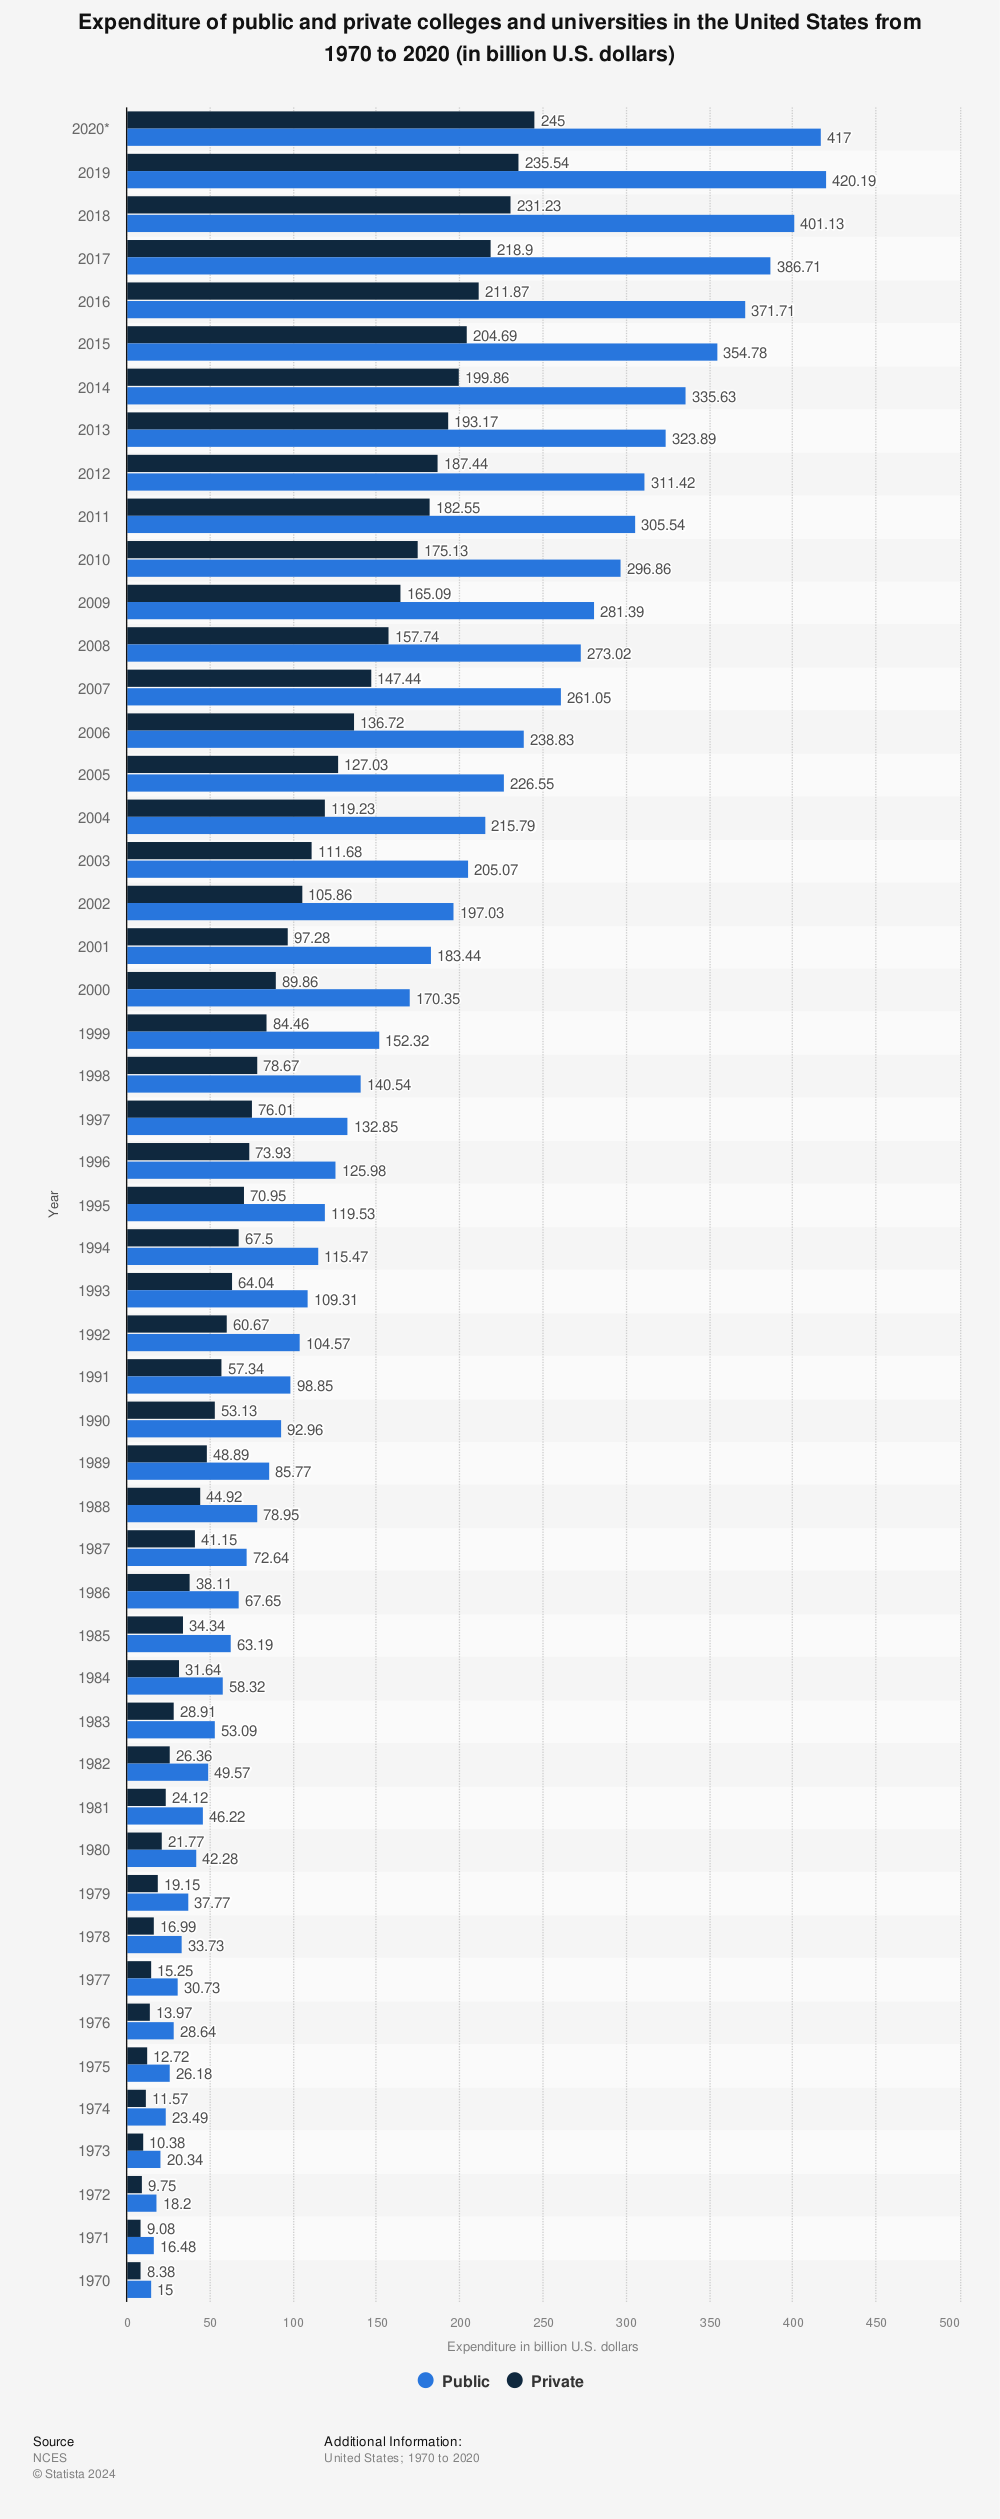 Statistic: Expenditure of public and private colleges and universities in the United States from 1970 to 2019 (in billion U.S. dollars) | Statista